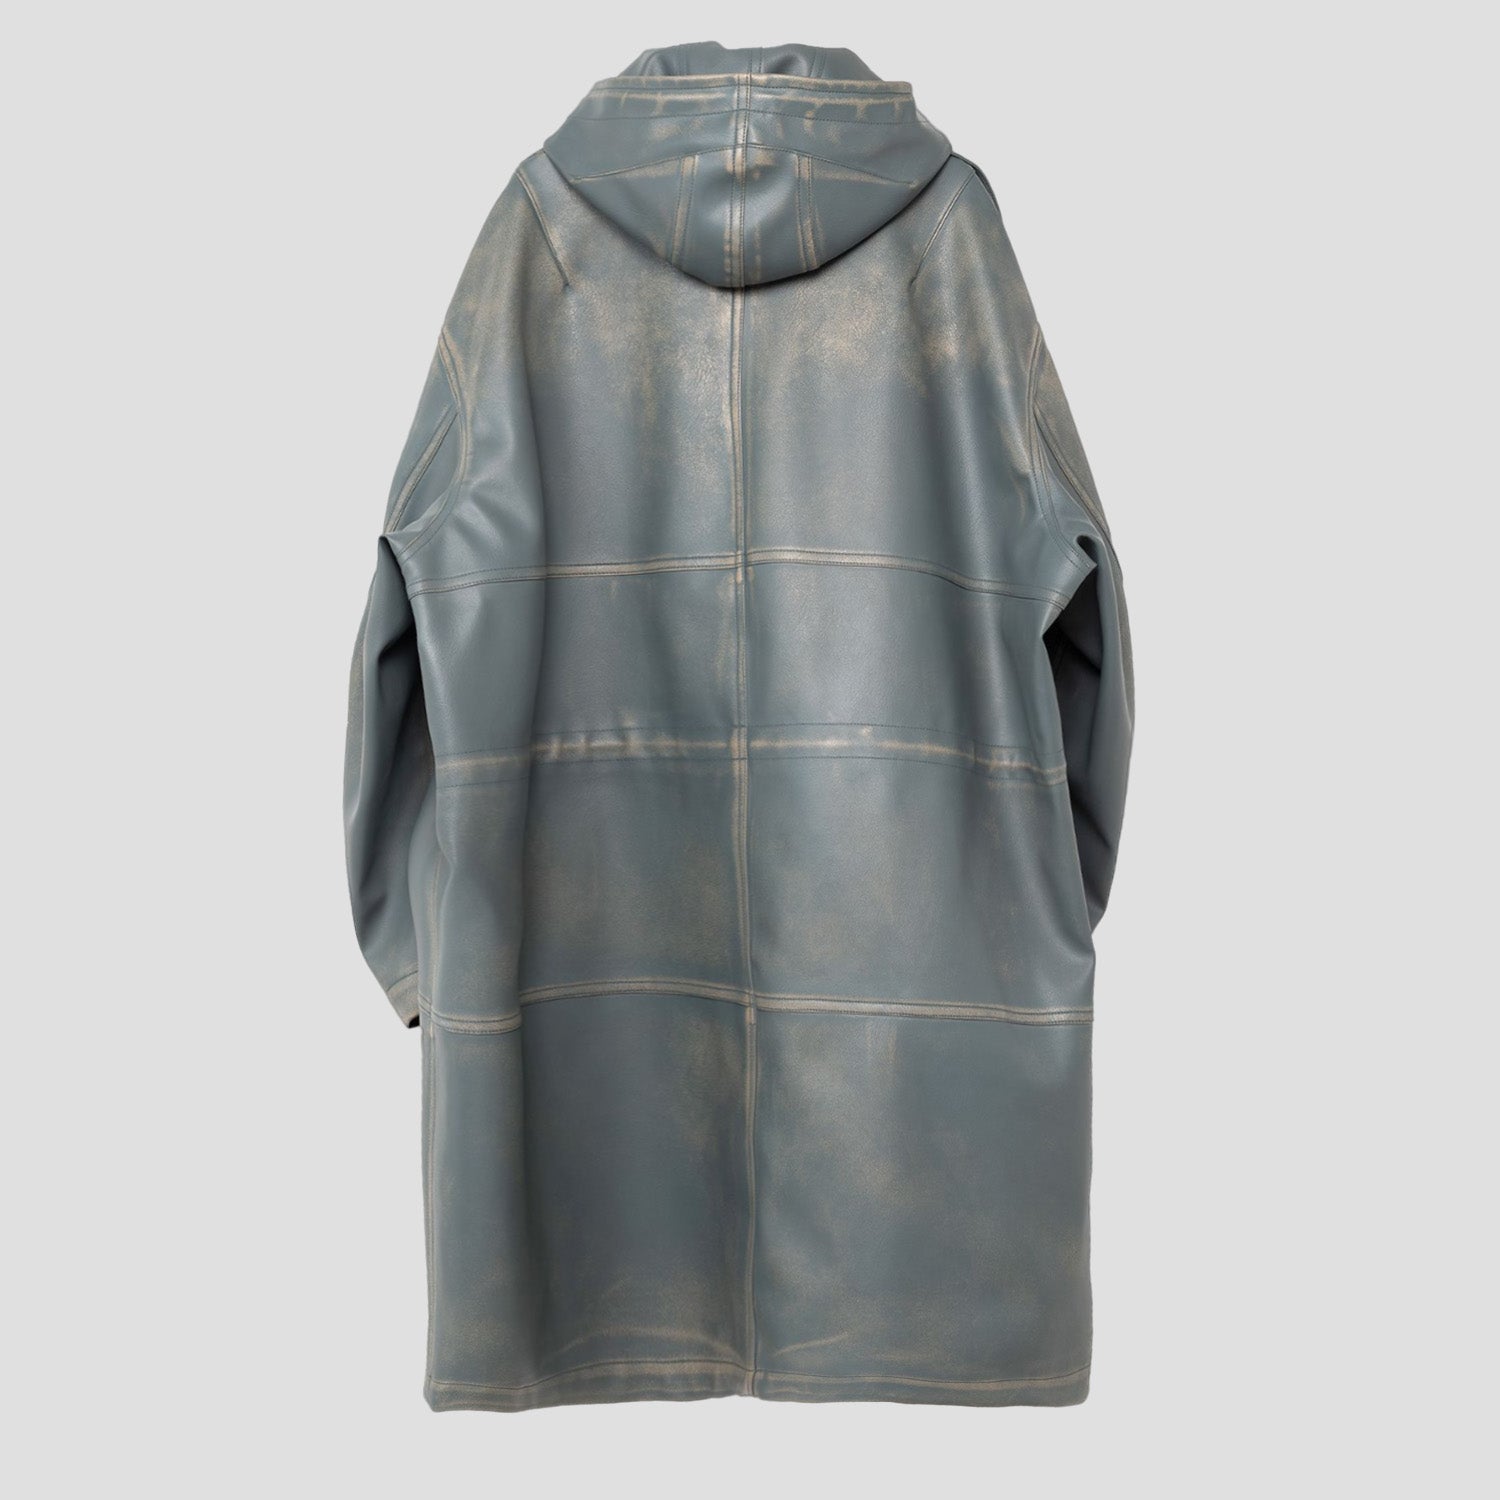 SYNTHETIC LEATHER HOODED COAT